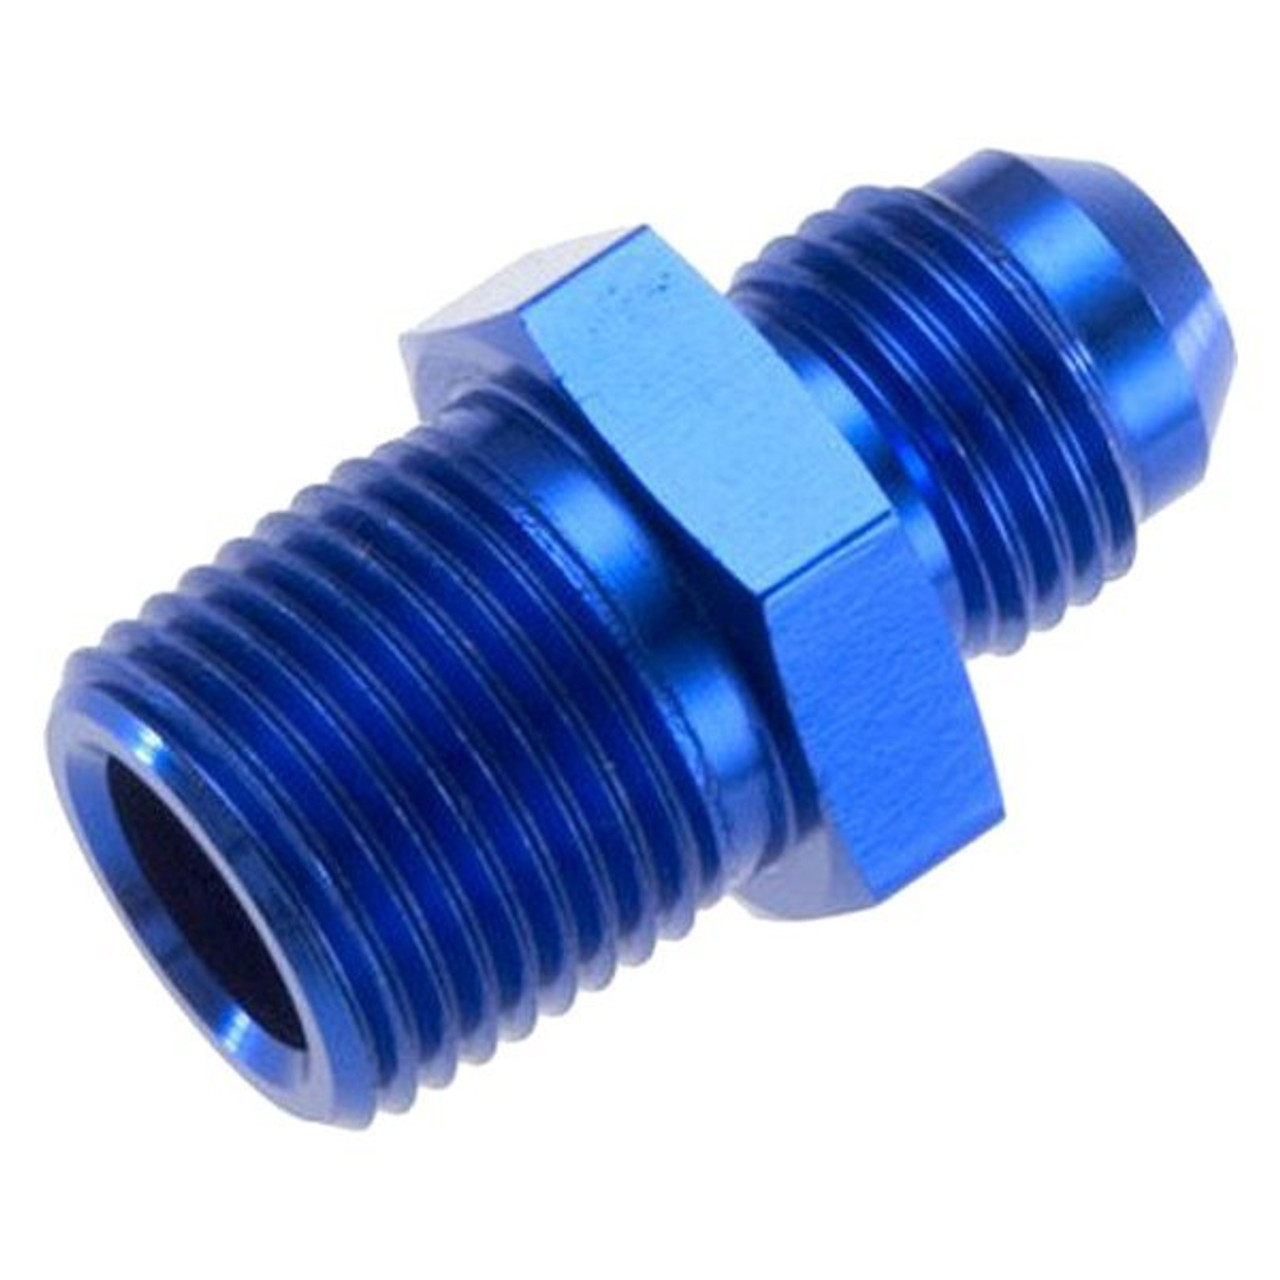 RHP816-06-06-1, Straight Male Adapter  -06 straight male adapter to -06 (3/8